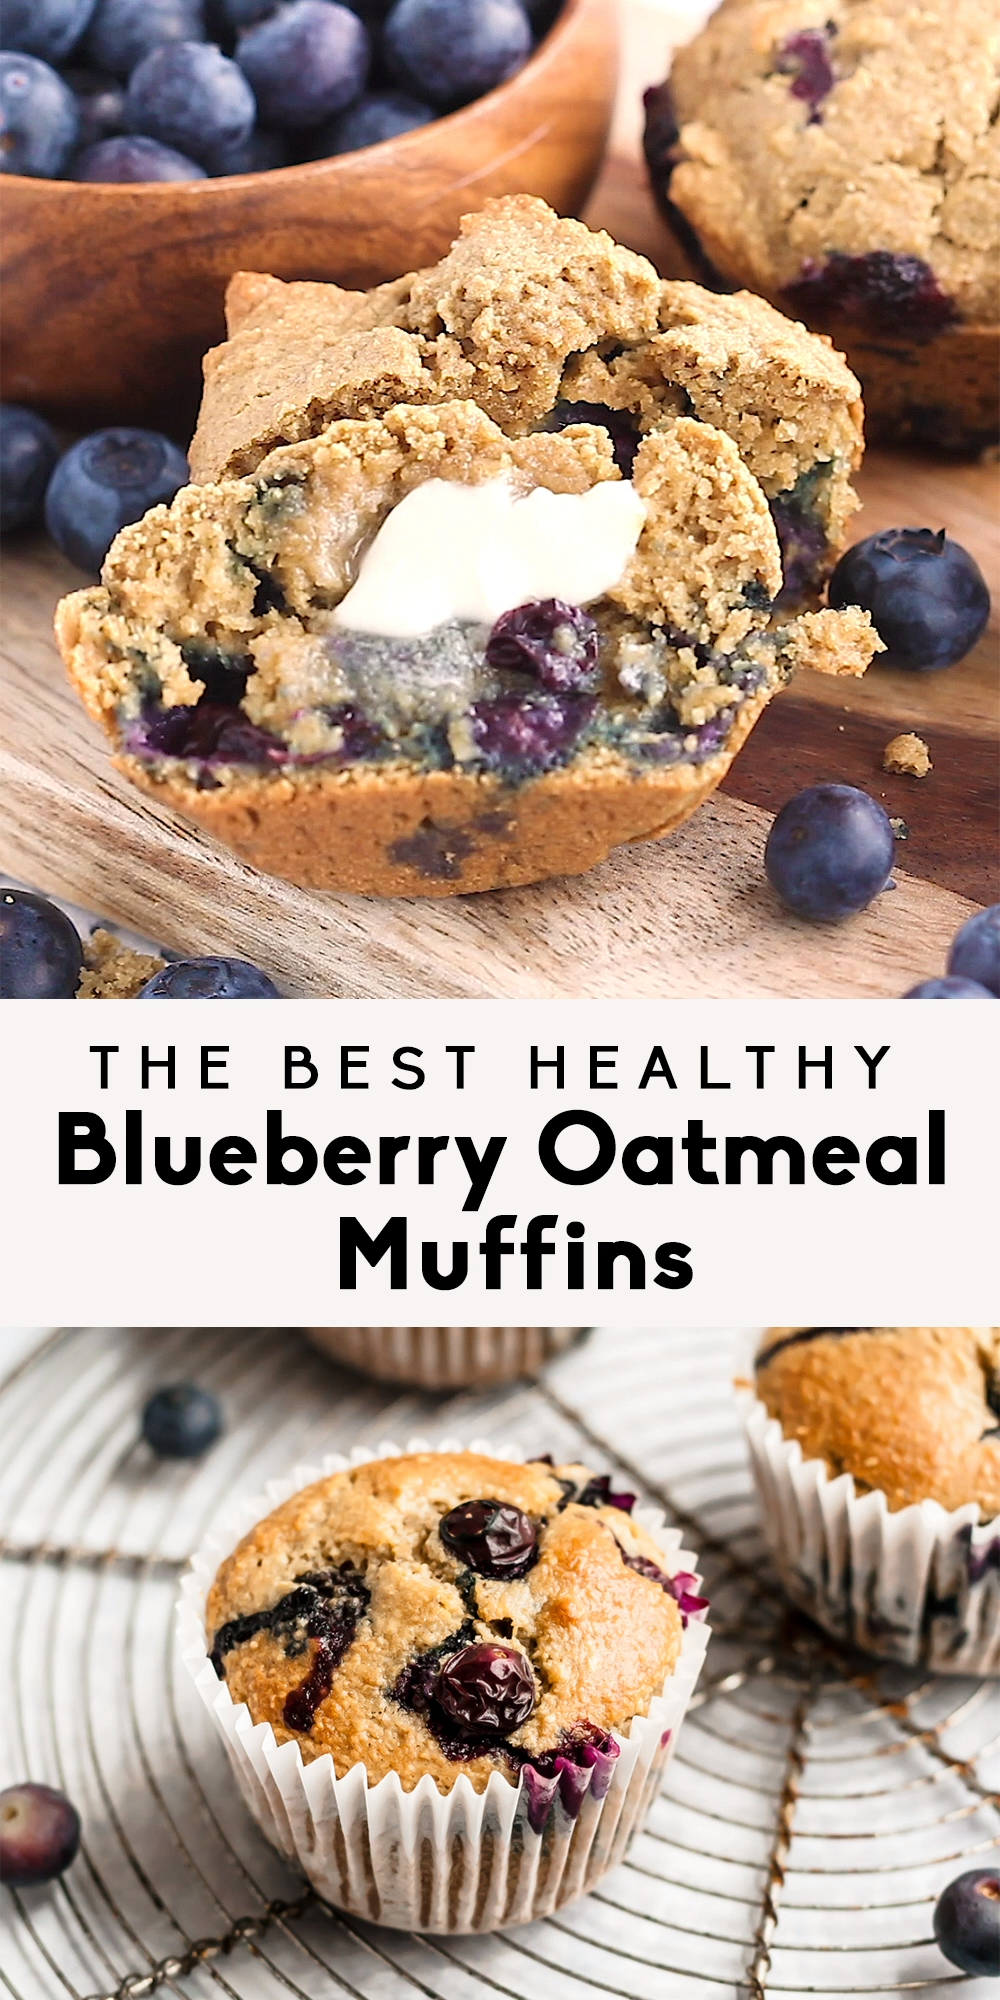 Healthy Blueberry Oatmeal Muffins With Almond Flour